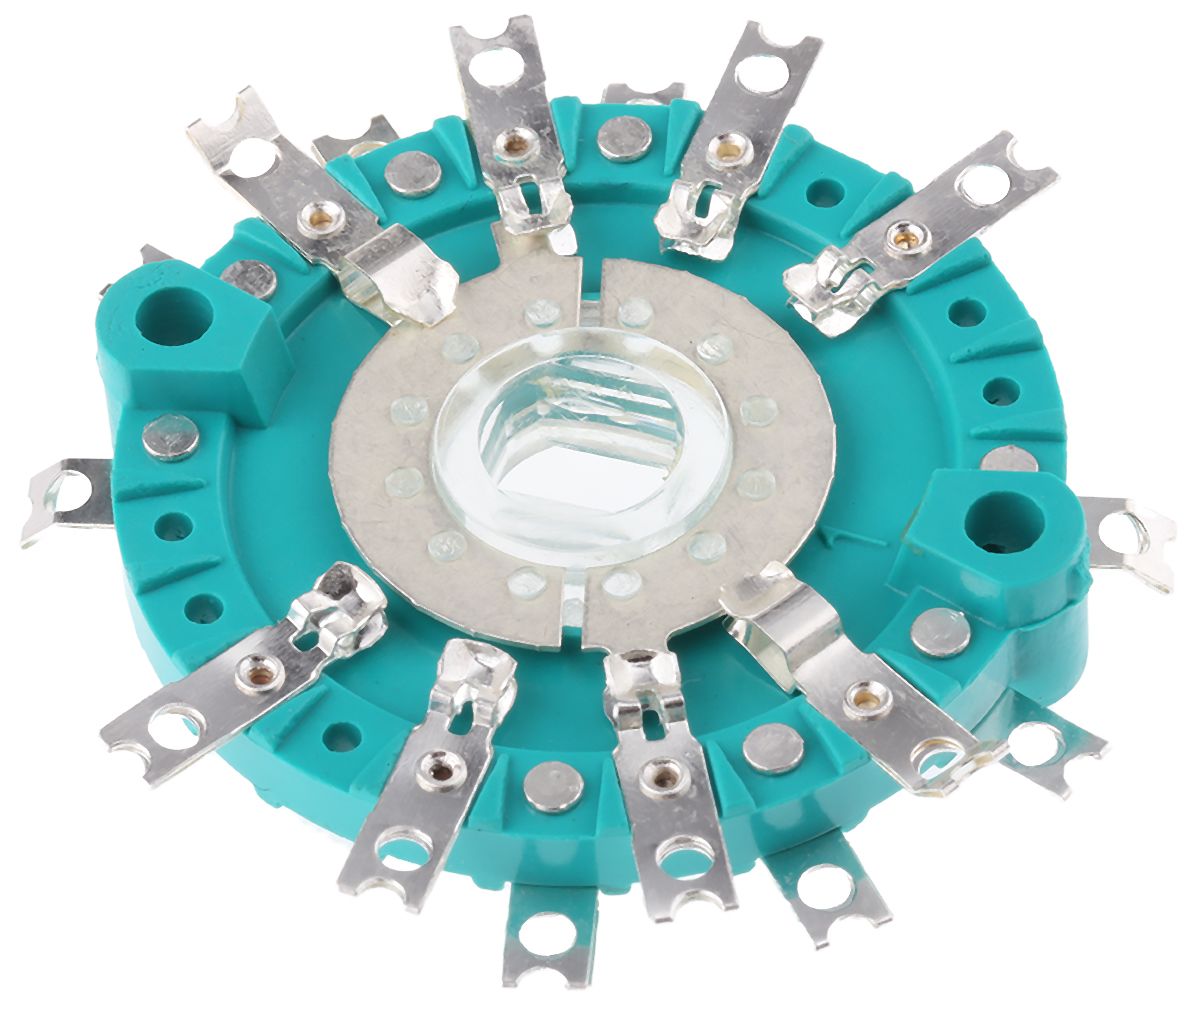 NSF Rotary Switch Wafer 3-Position